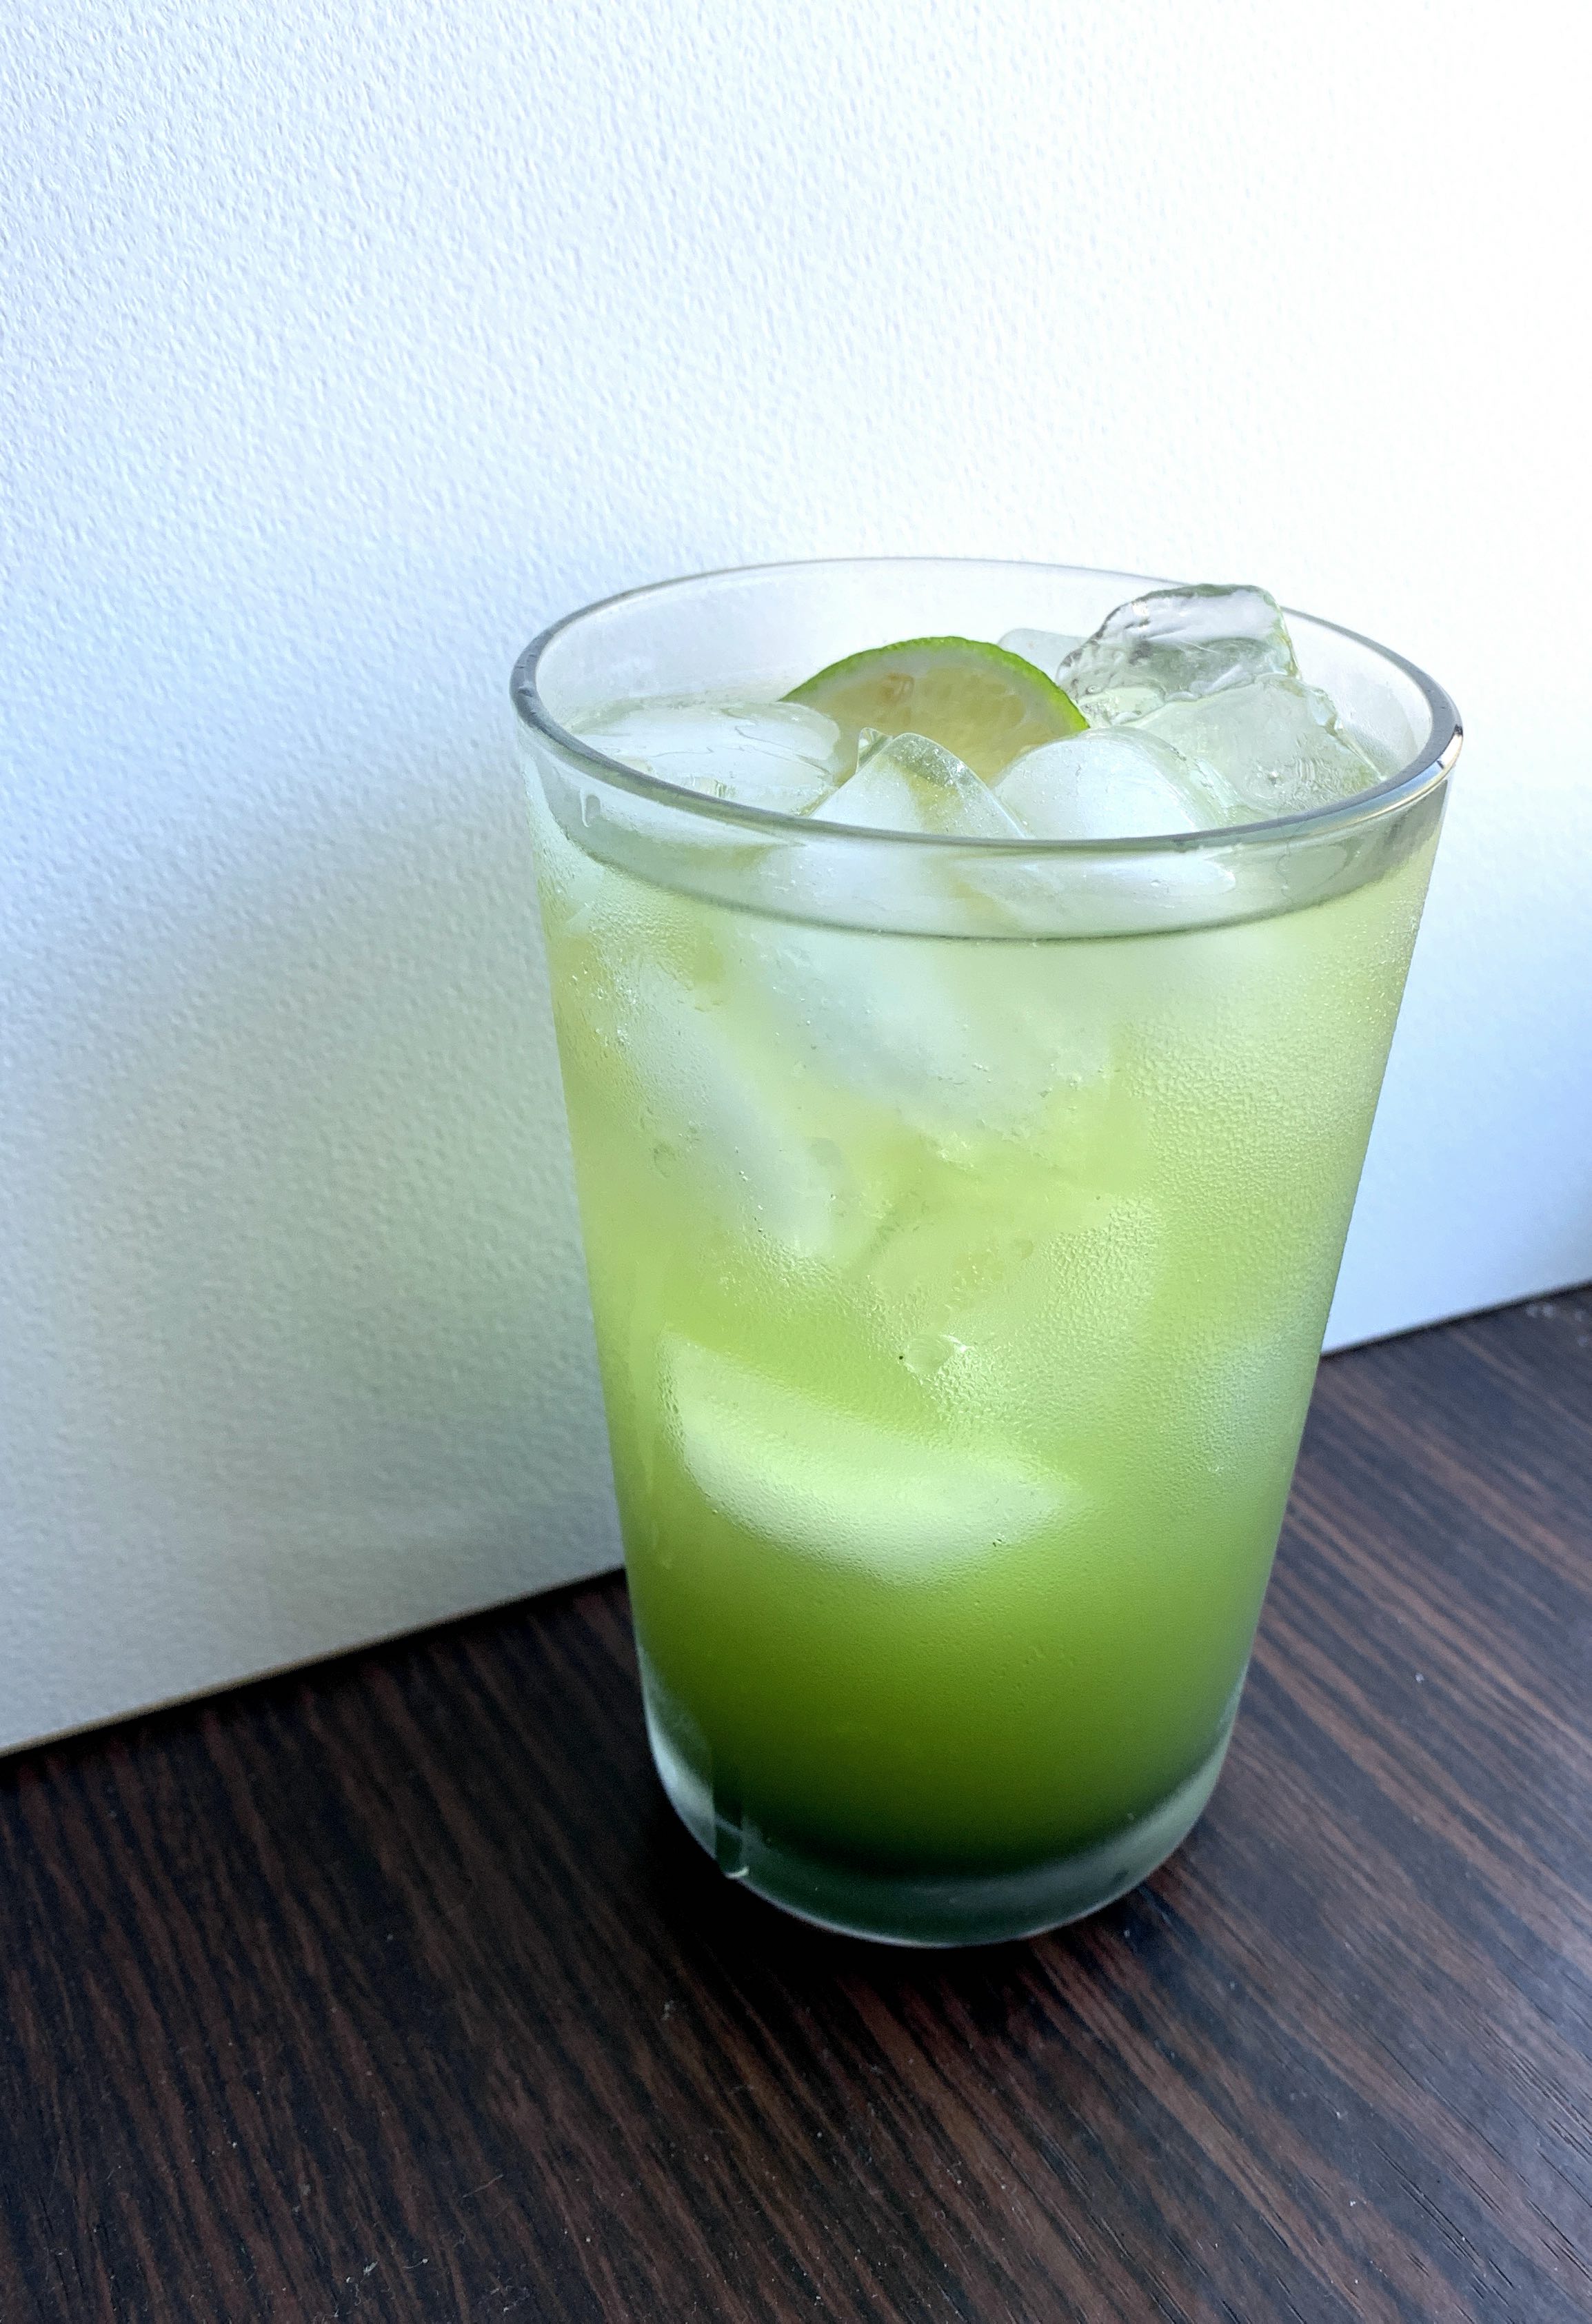 Savvy-Sips-Ginger-Genmai-Gin-and-Tonic-Japanese-Gin-Tonic-2